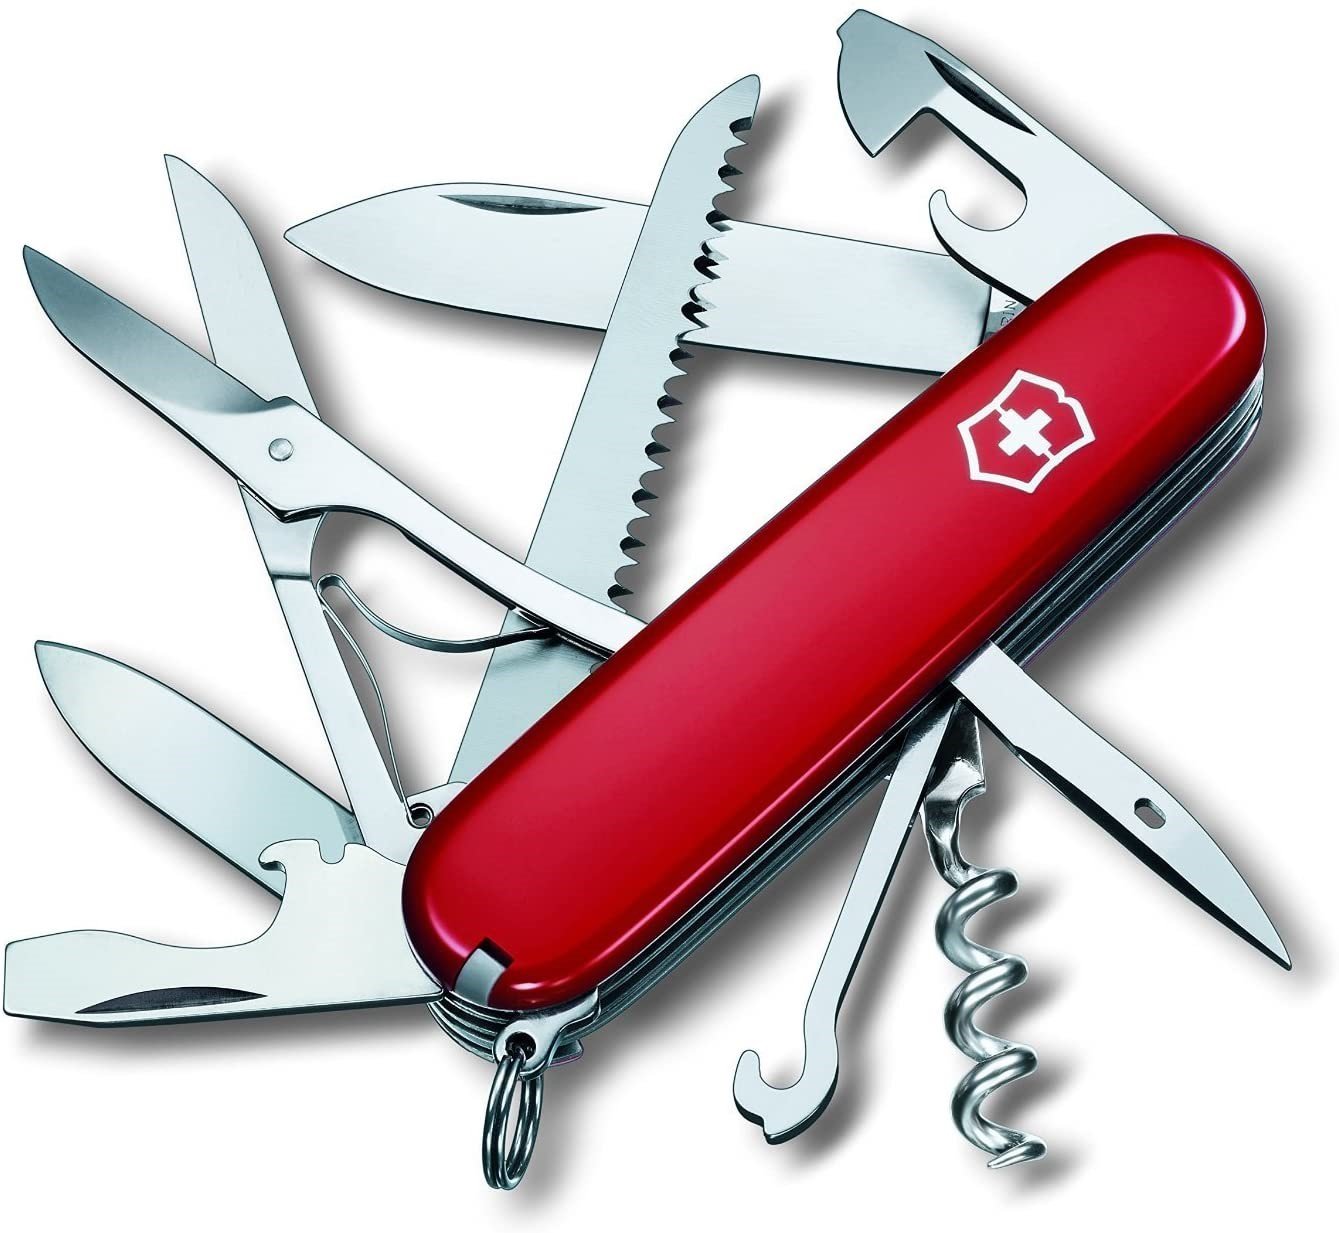 Recommended Totoku knife (Swiss Army knife) summary! If you are an outdoor man, you want to have one., Shieldon